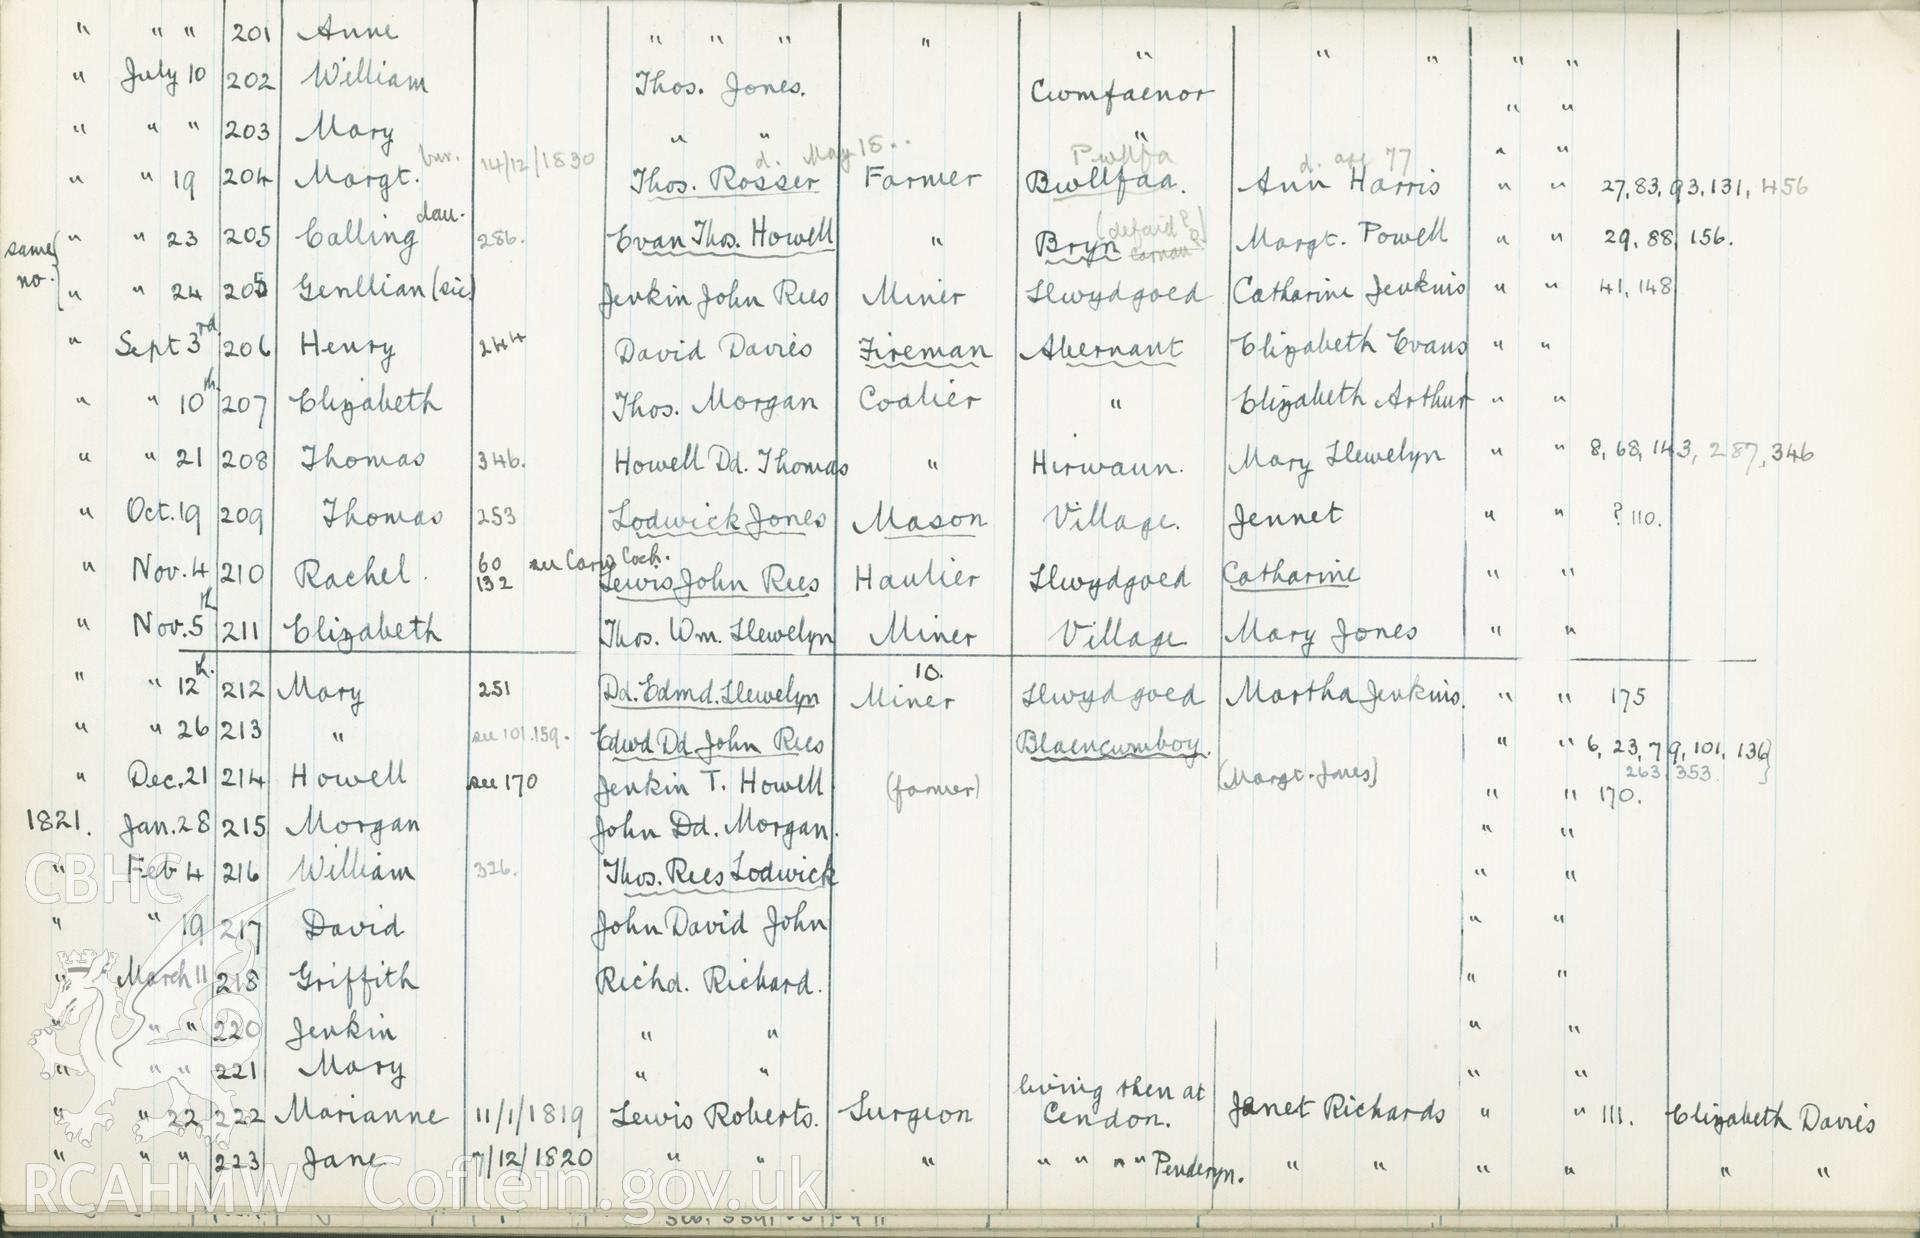 "Baptism Registered" book for Hen Dy Cwrdd, made between April 19th and 28th, 1941, by W. W. Price. Page listing baptisms from 17th June 1820 to 22nd March 1821. Donated to the RCAHMW as part of the Digital Dissent Project.